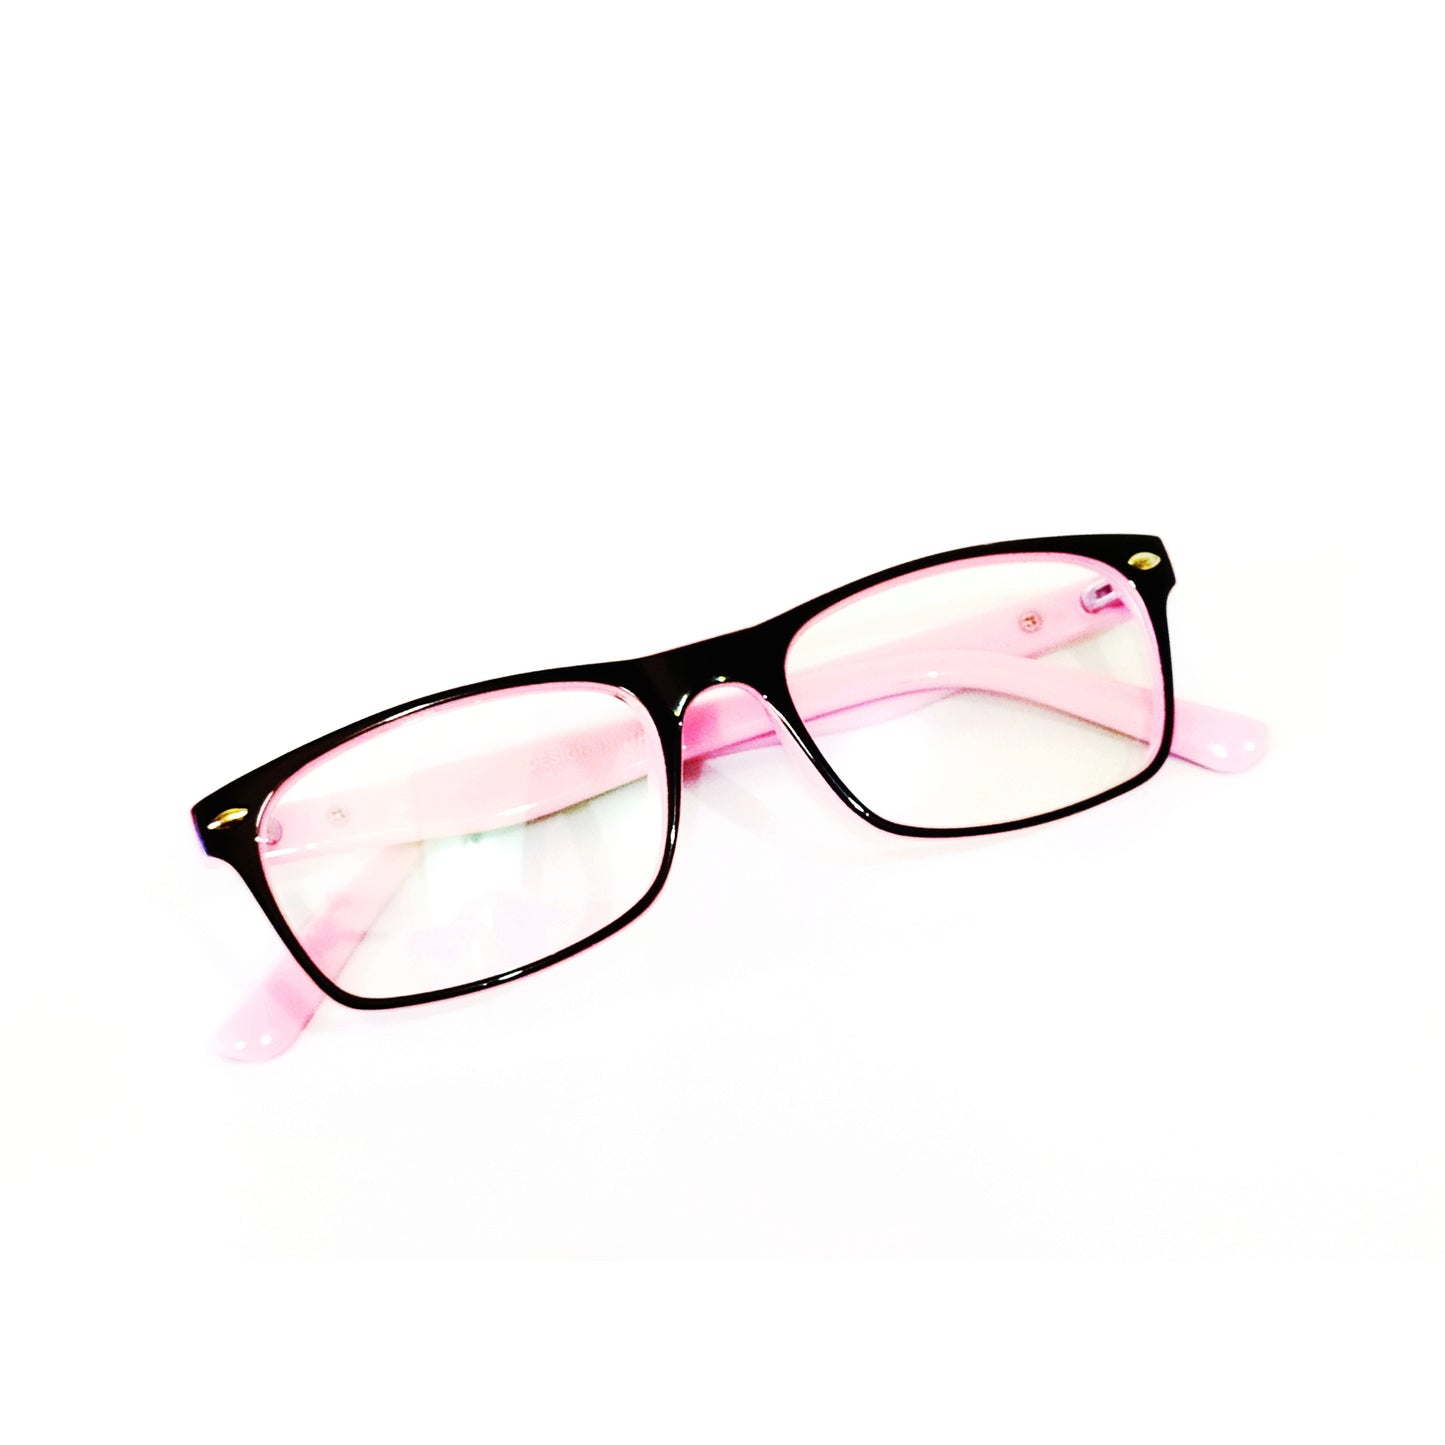 Kids Spectacle Frame Glasses with Zero Power Lens